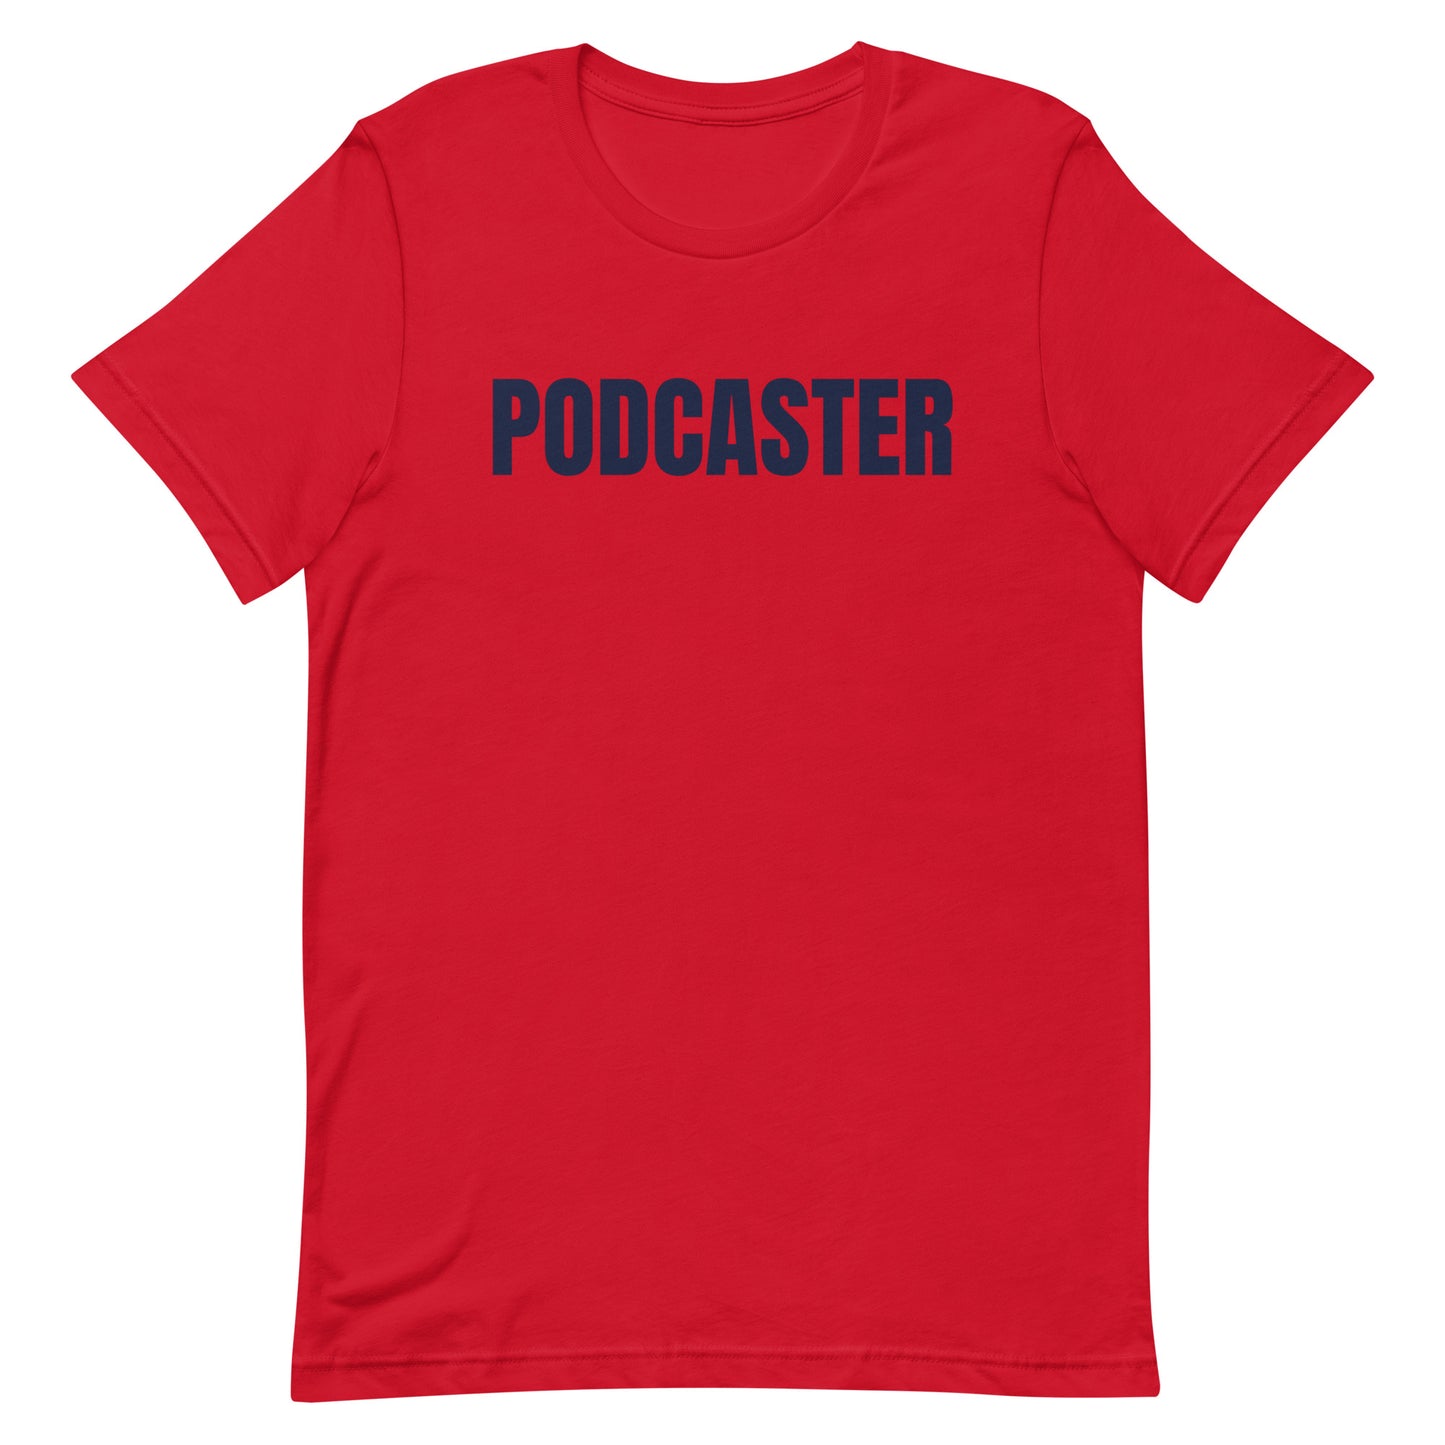 Podcaster Tee